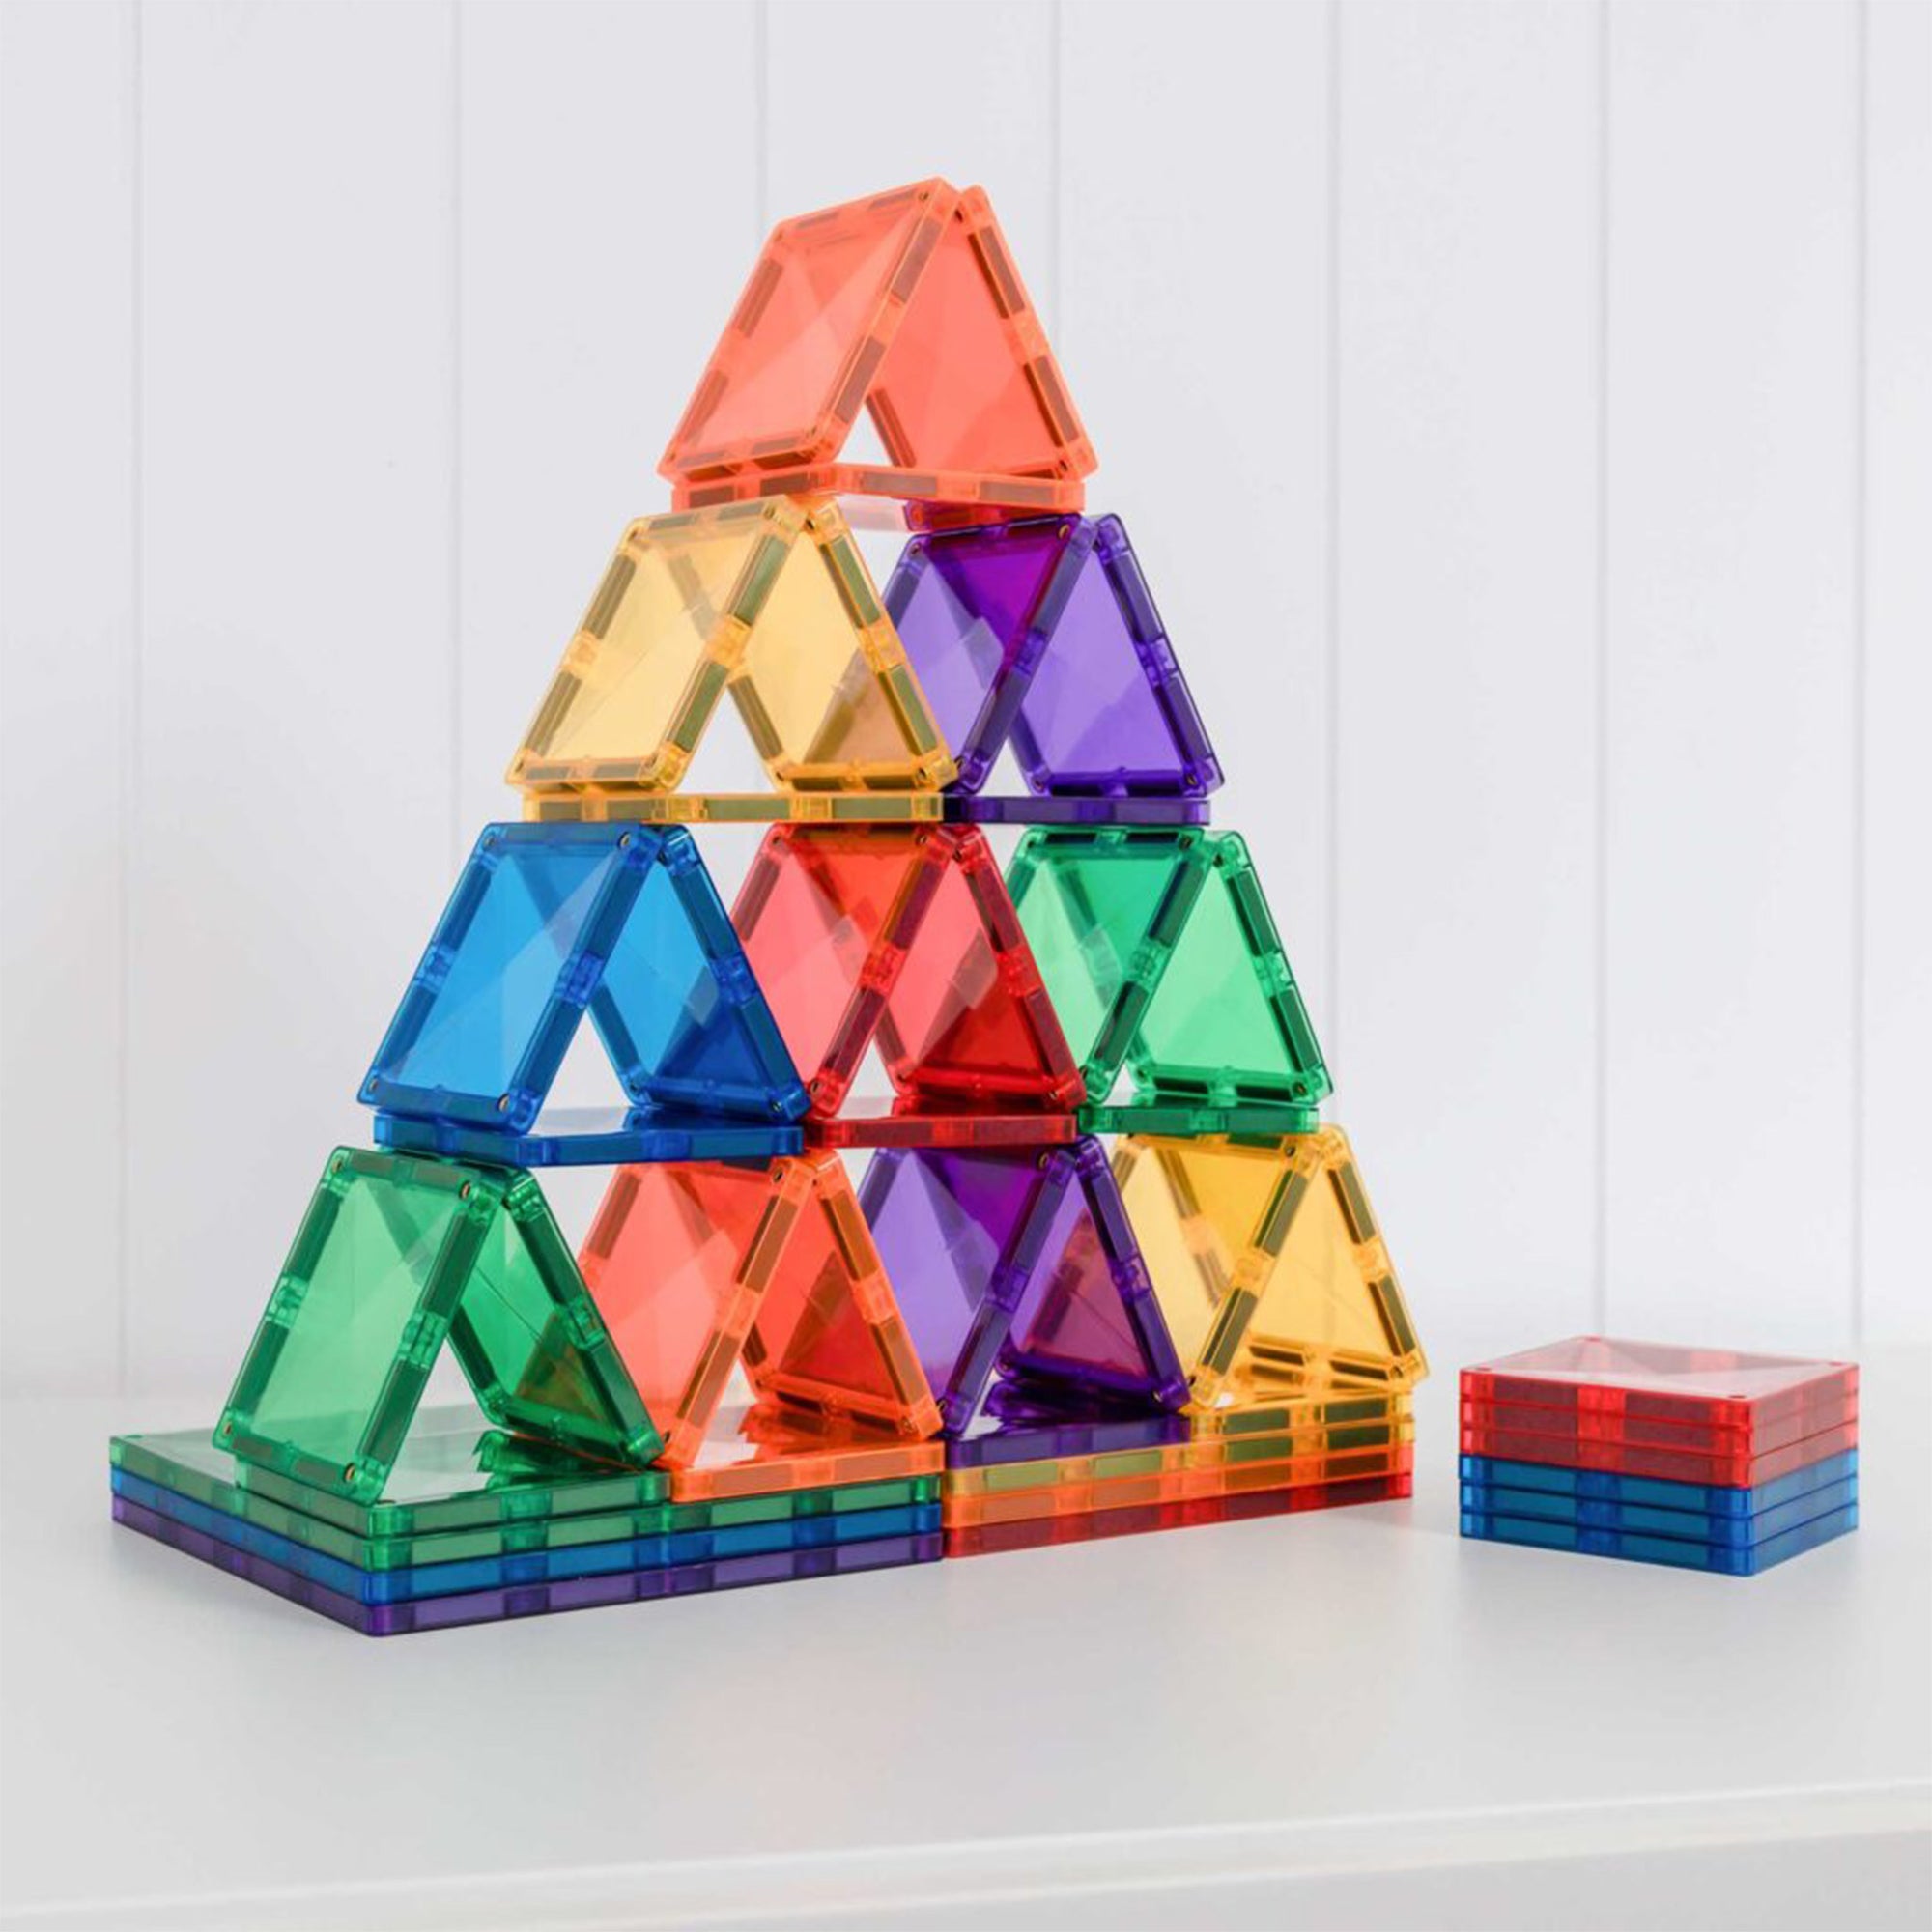 Connetix 42 Piece Rainbow Square Pack | The Elly Store